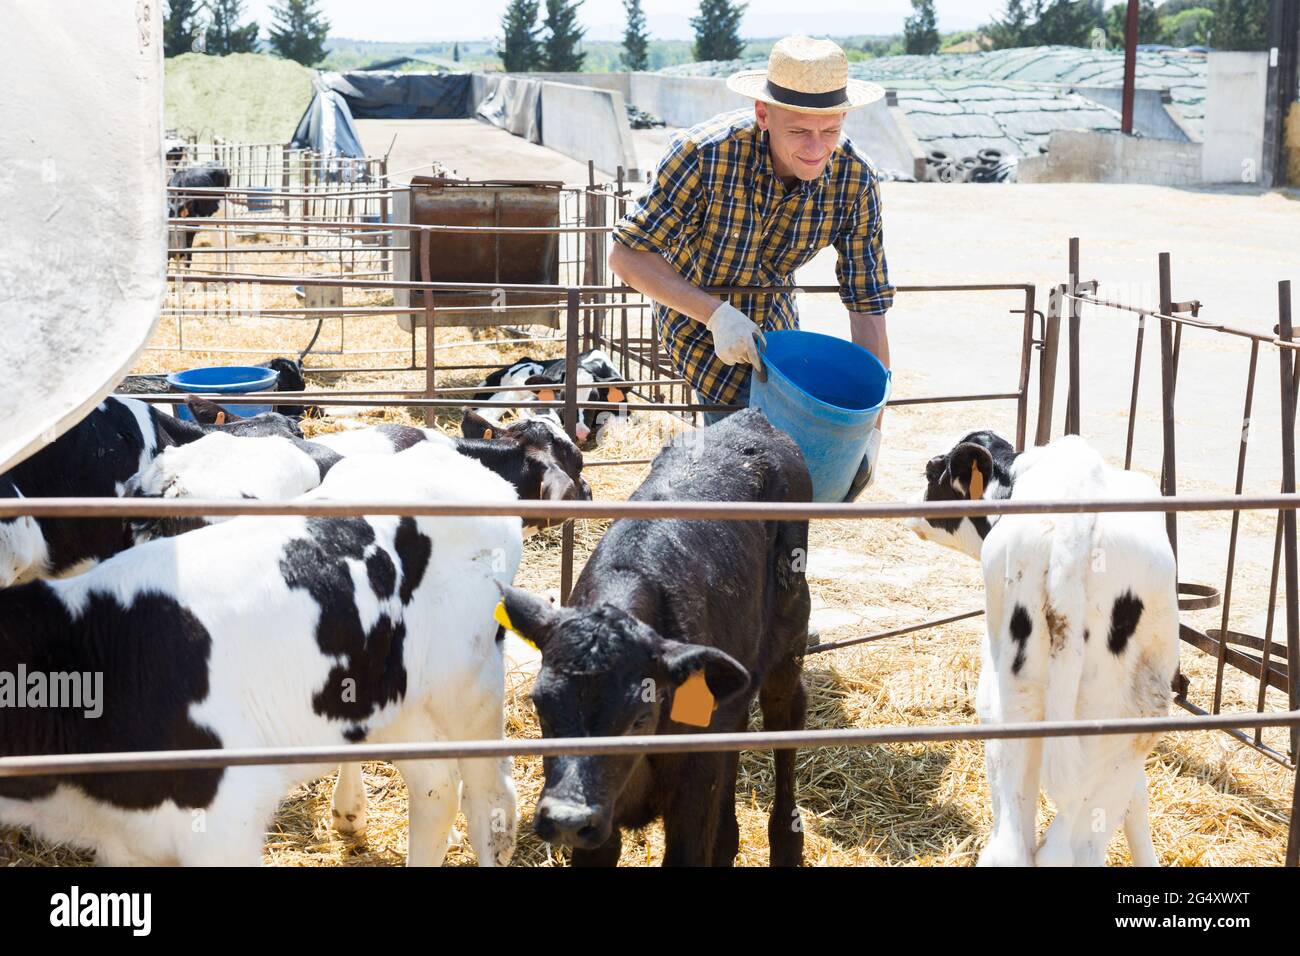 Focused young man with a bucket is about to water the young calves Stock Photo